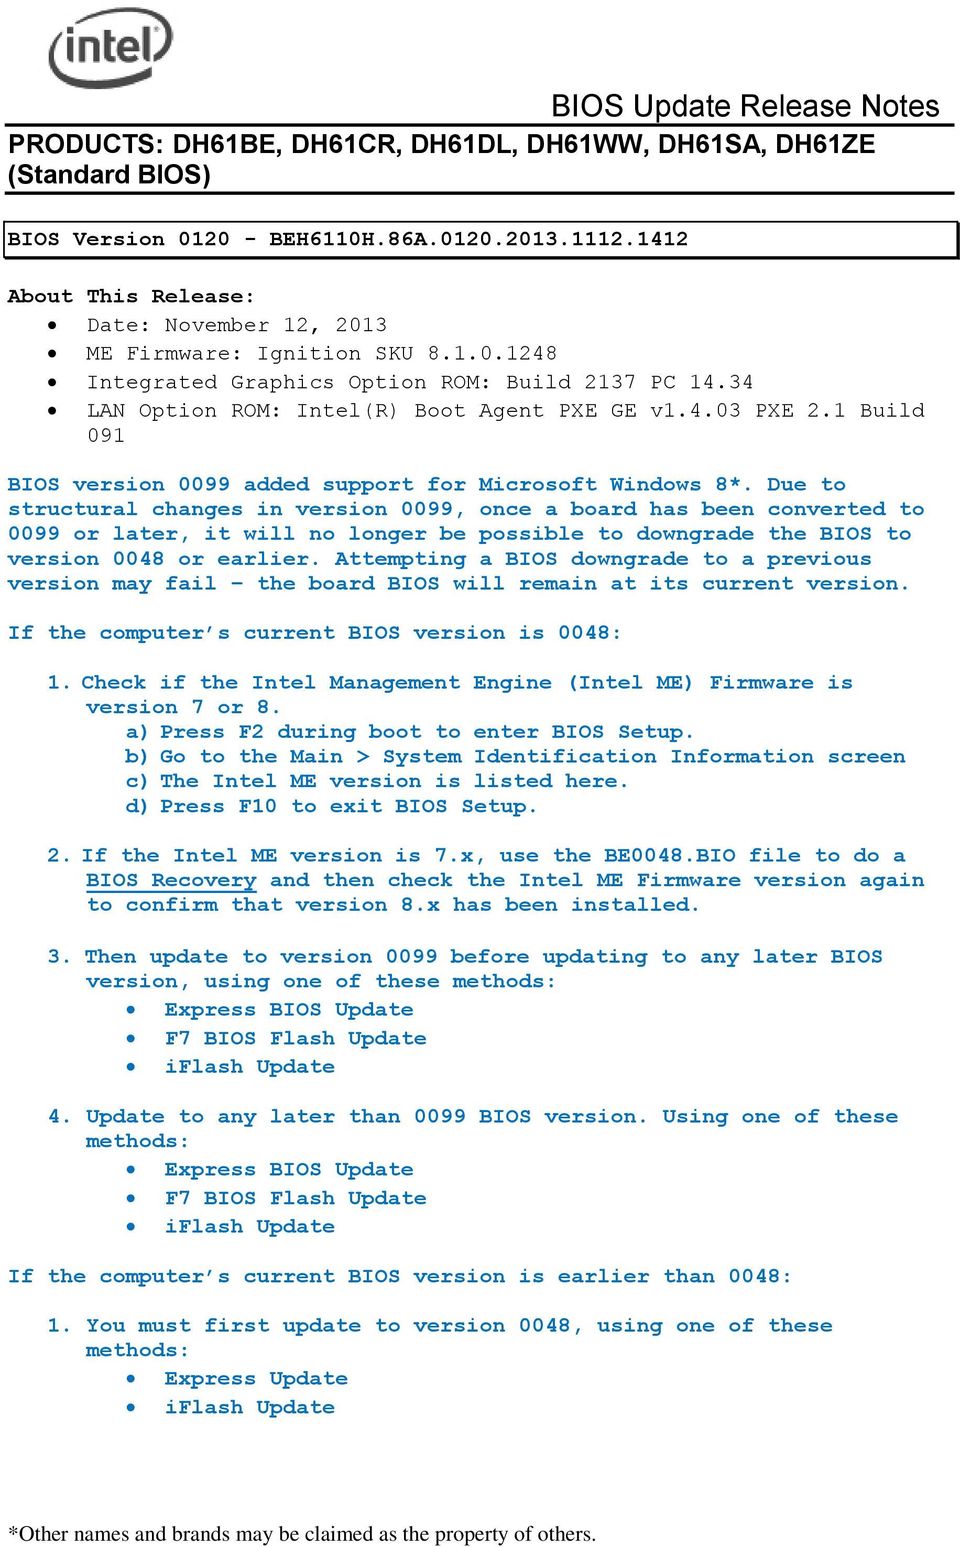 1 Build BIOS version 0099 added support for Microsoft Windows 8*.